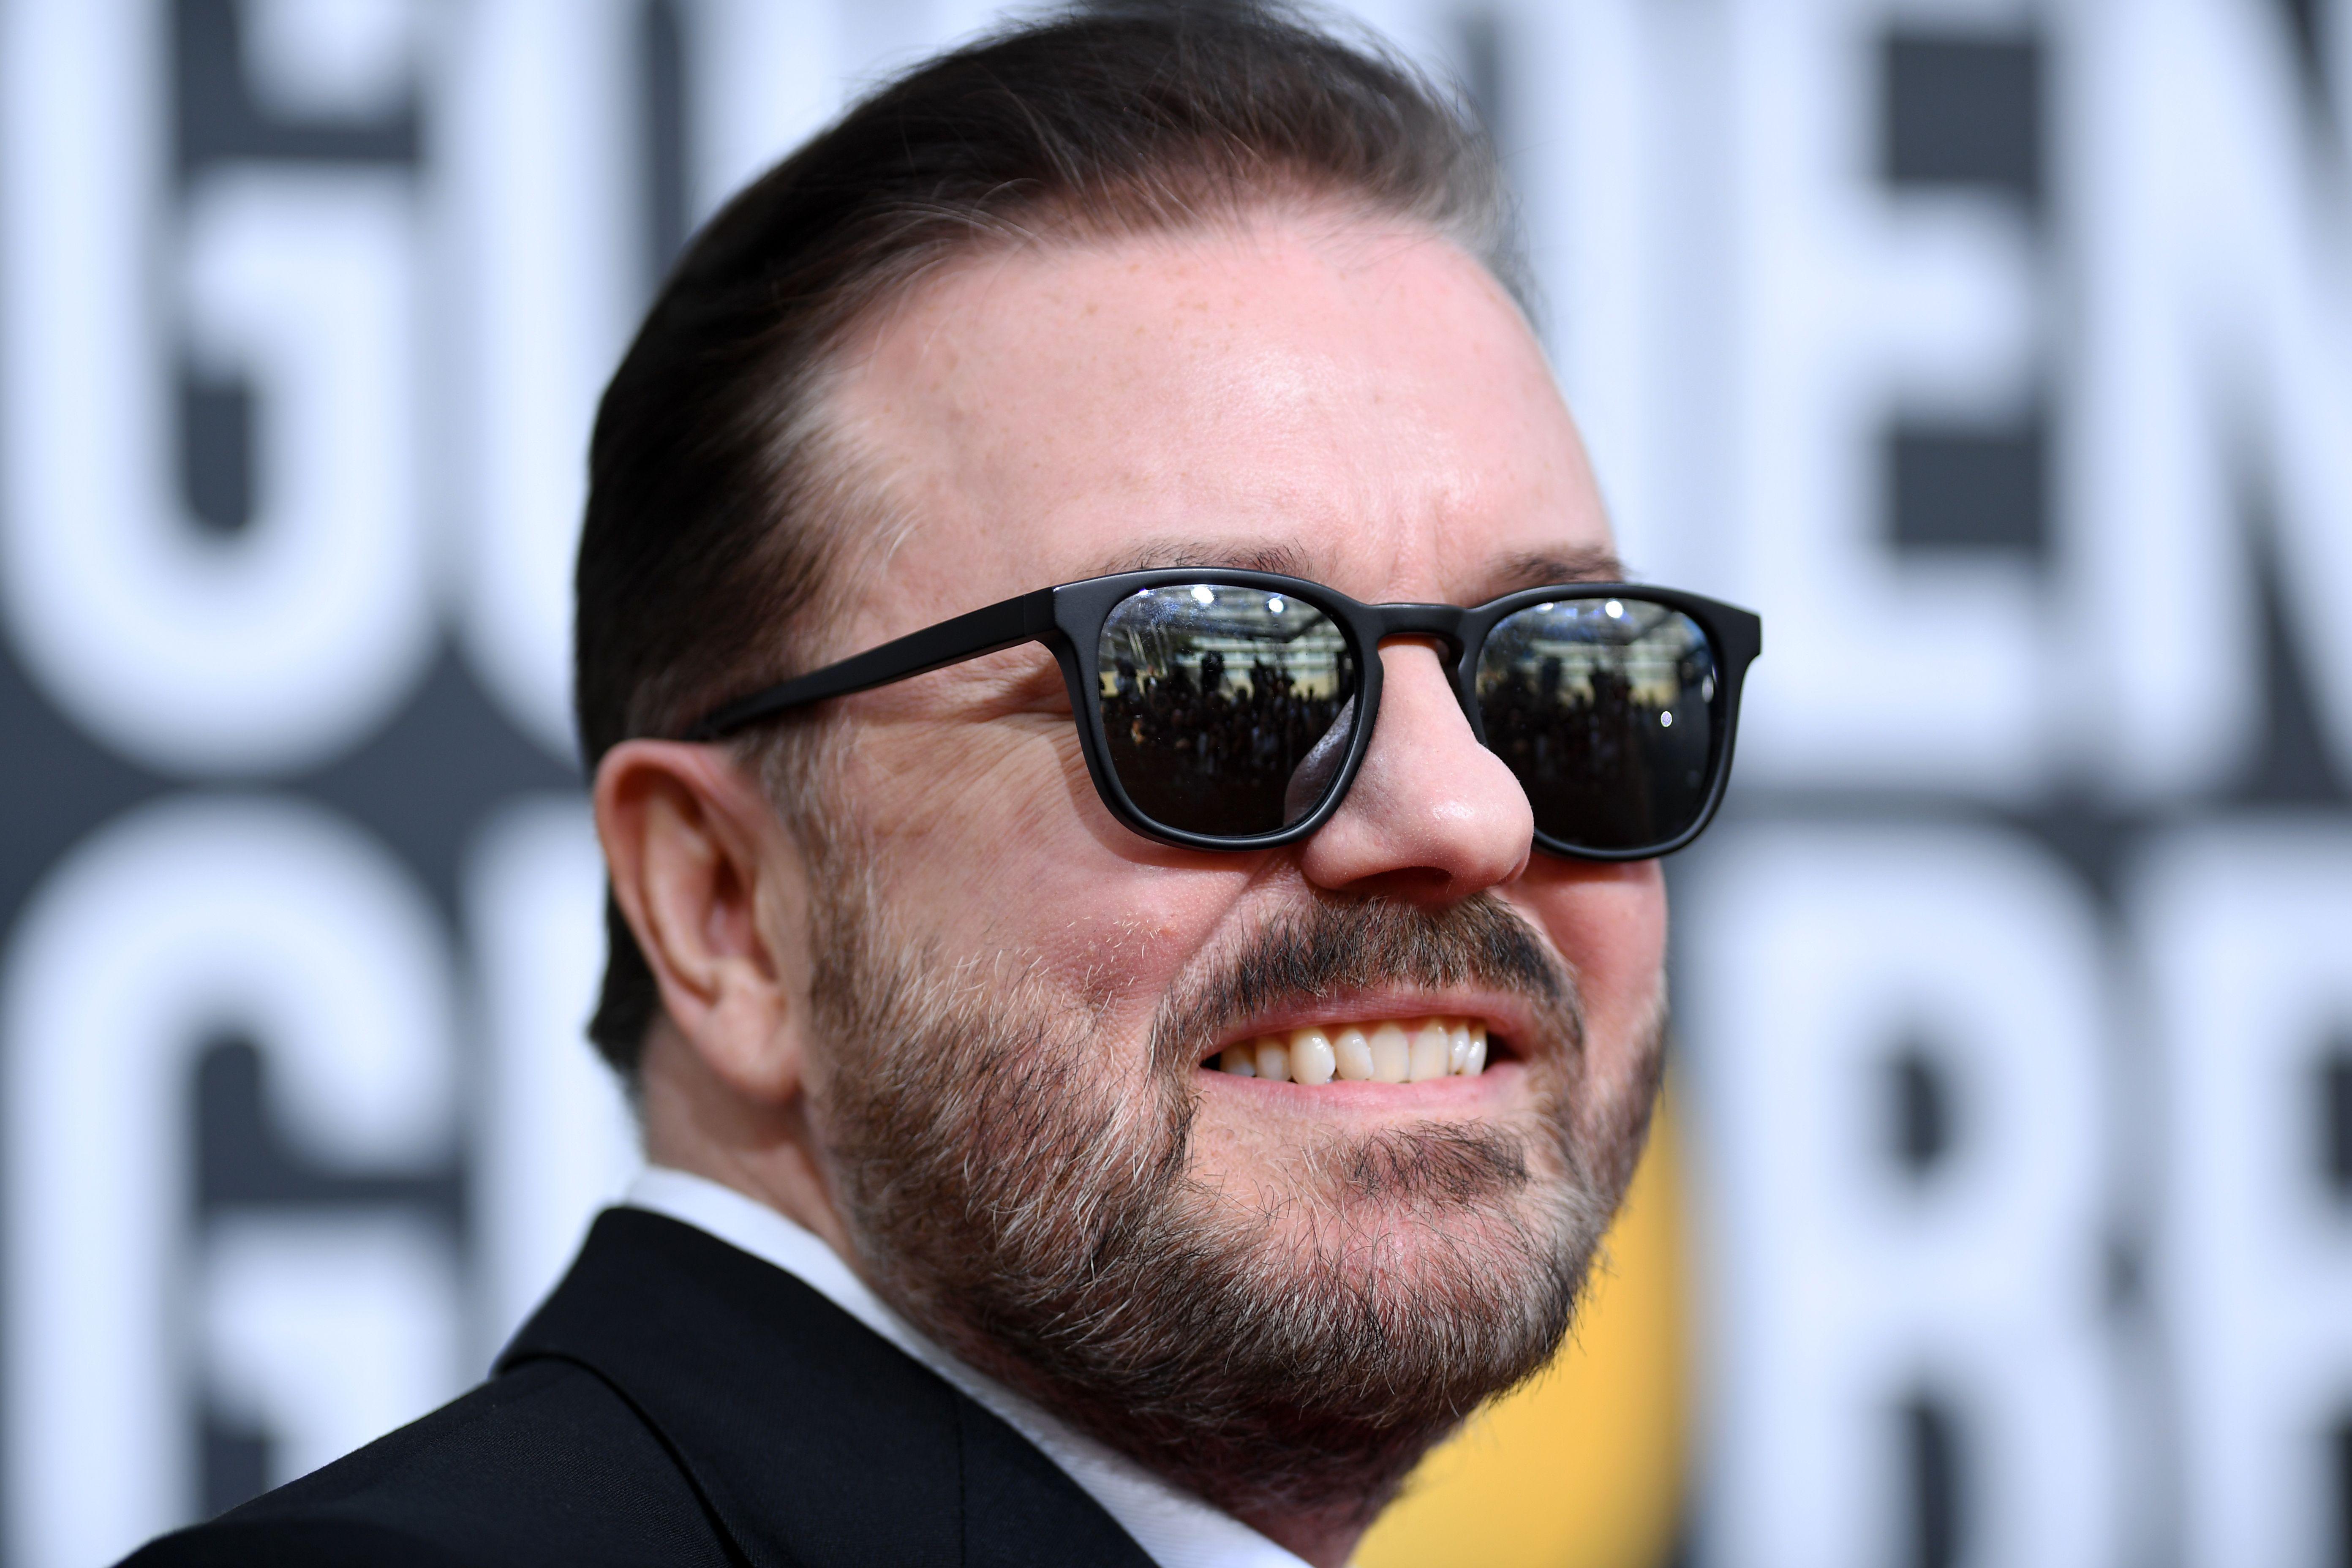 Ricky Gervais smiling in sunglasses with a shit-eating grin.